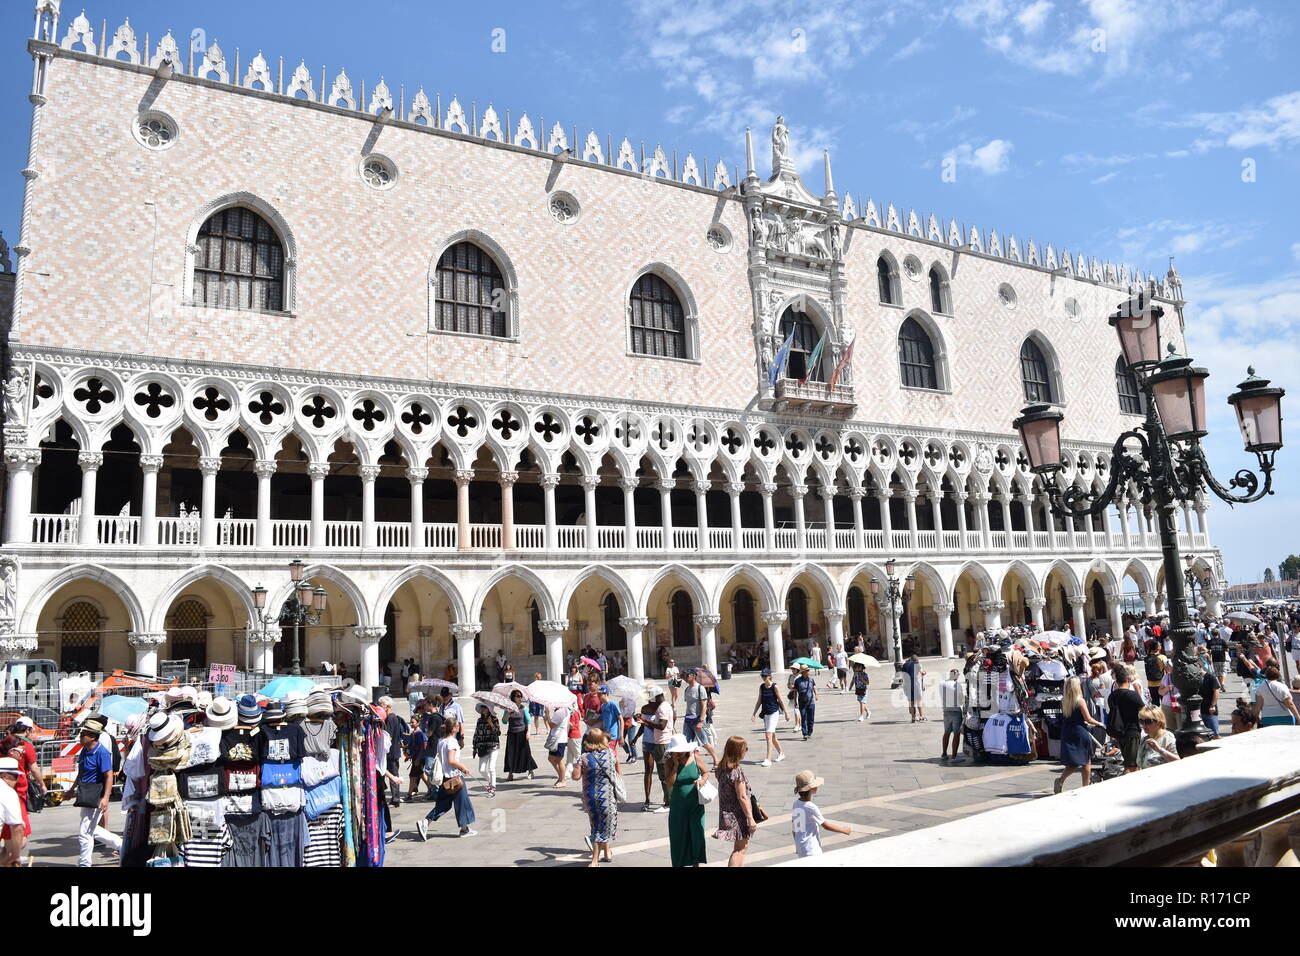 The Palace of the Doge in Venice Stock Photo